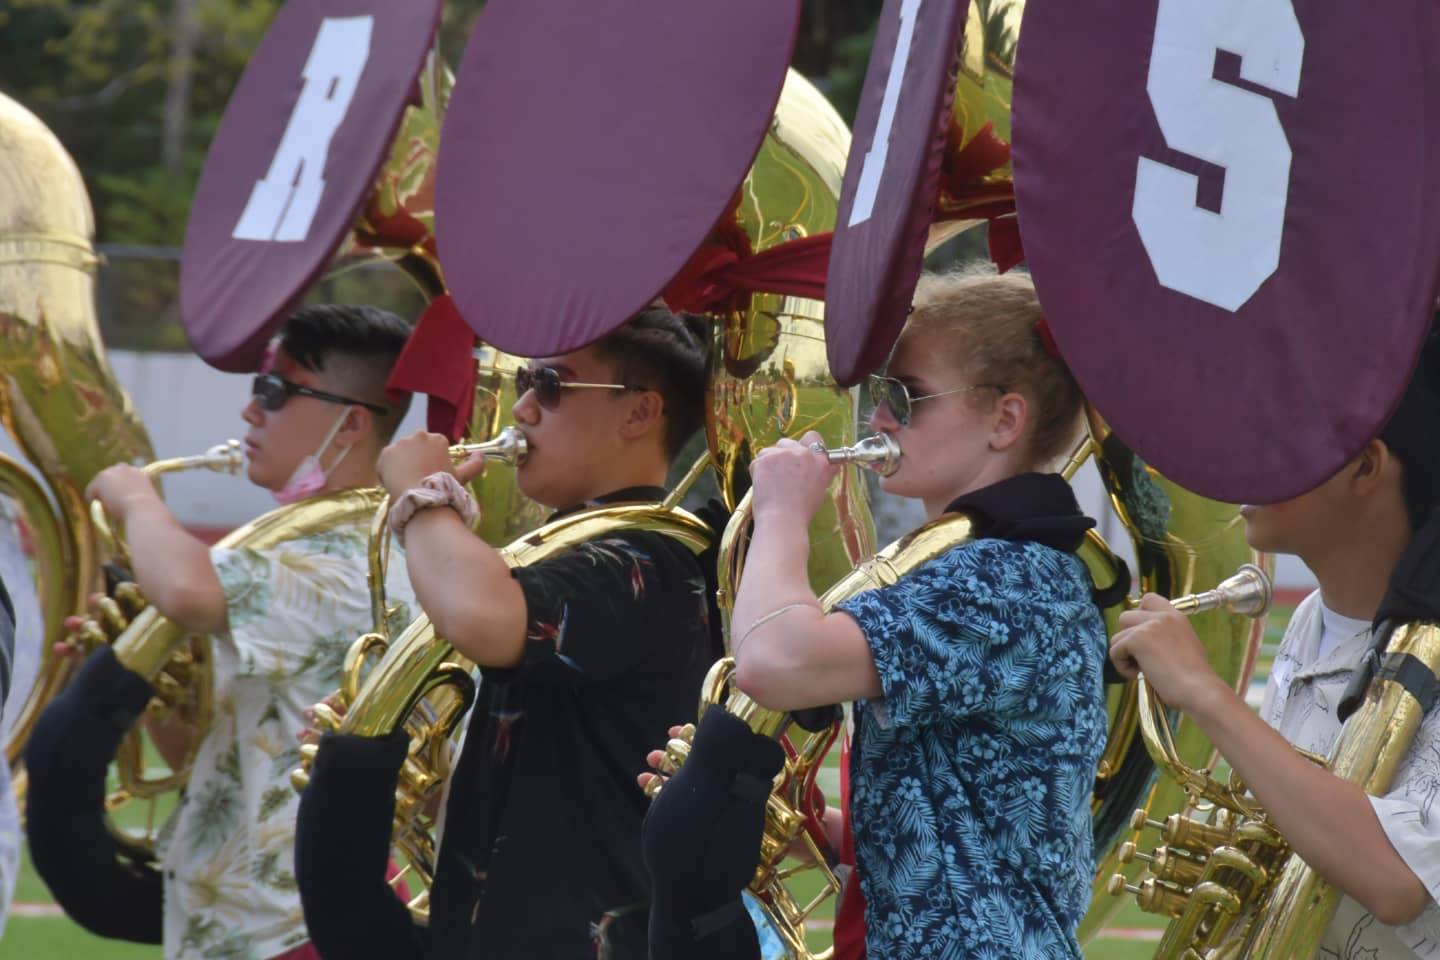 The Mercer Island High School (MIHS) marching band participates in the opening day of its five-day camp on Aug. 16 at Islander Stadium. Pictured are sousaphone players, left to right, Connor Sun, Gabriel Andres and Lily Clark. Photo courtesy of Joe Chen